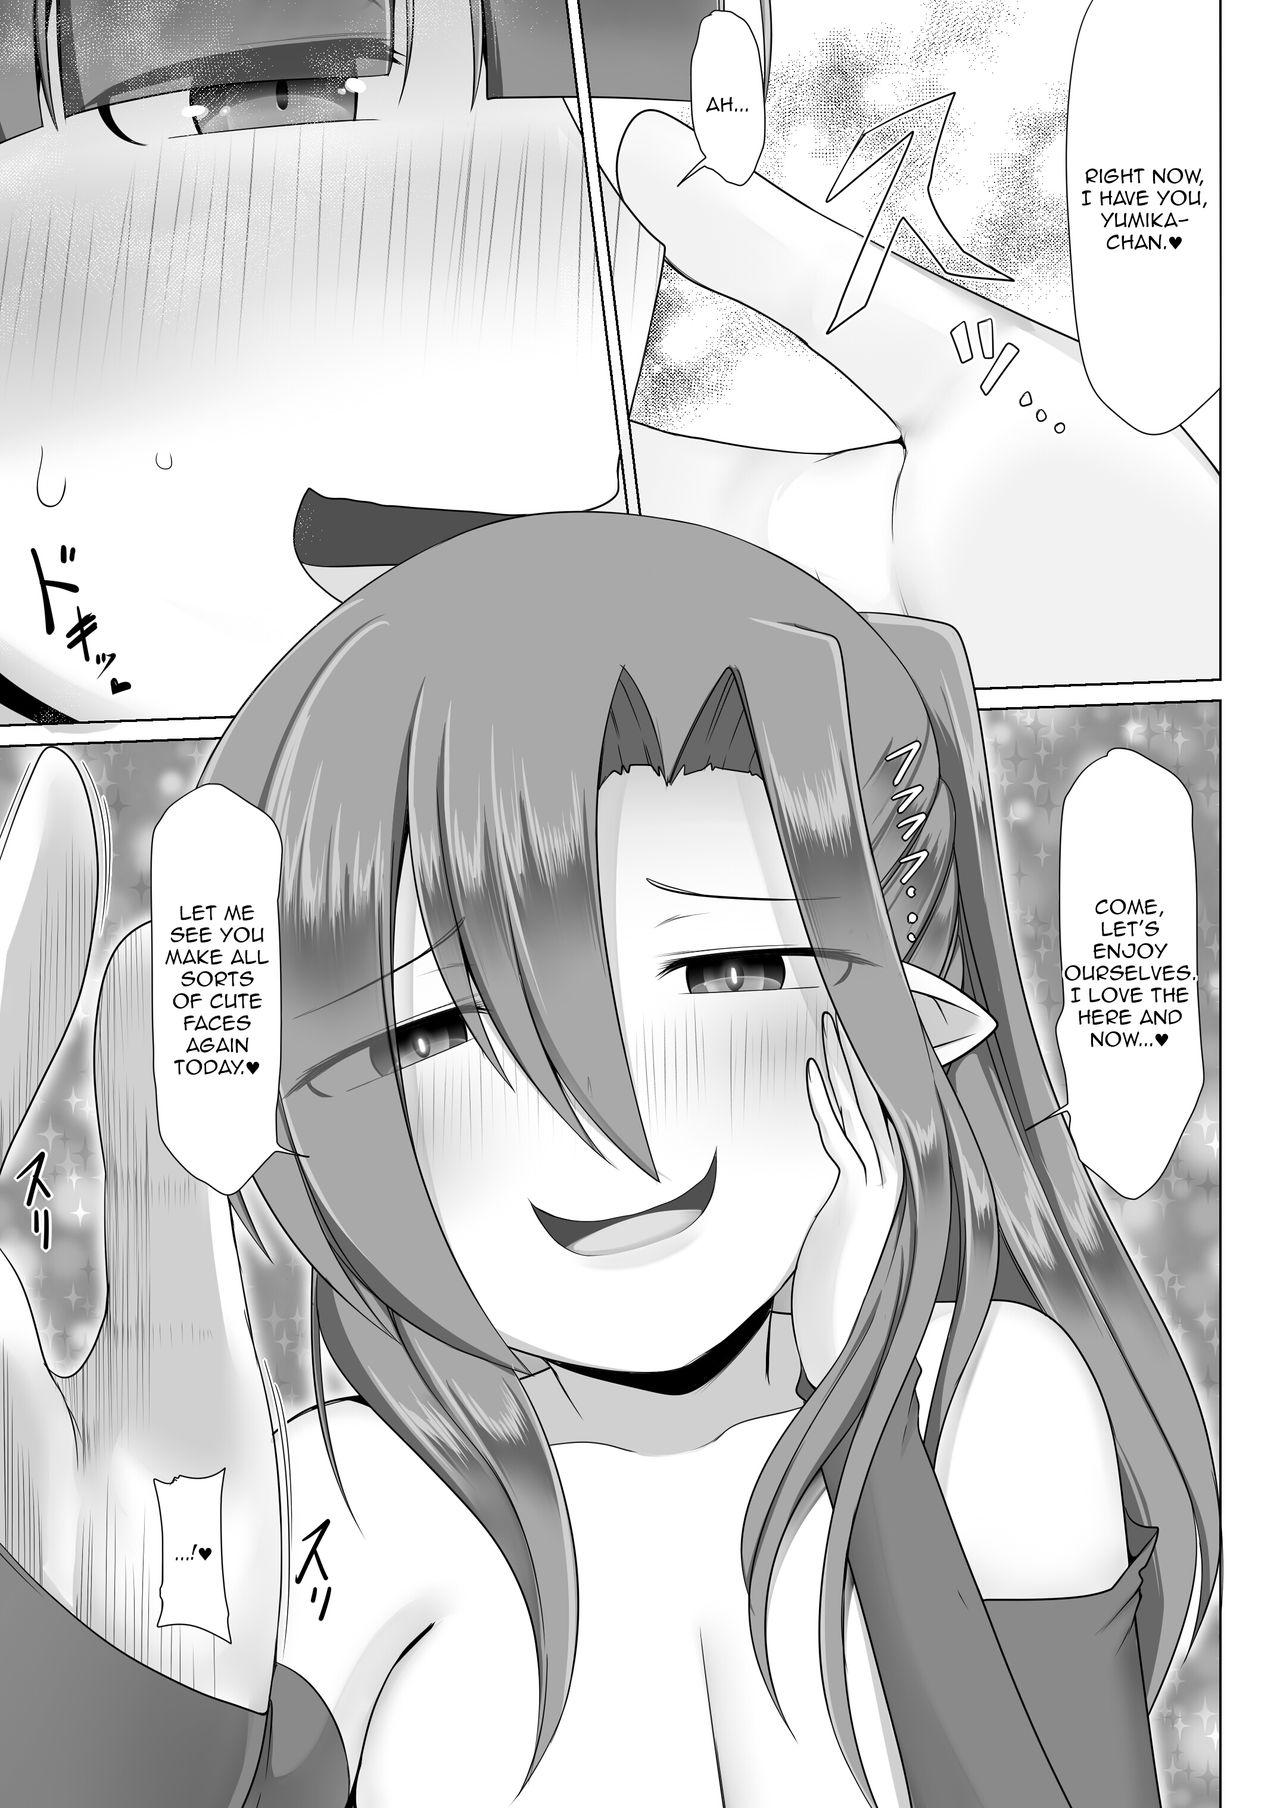 Pussy Play Lolicon Les Succubus wa Midara na Slow Life o Mankitsu Suru | The Leisurely Lewd Life of a Lesbian Lolicon Succubus Gay Blondhair - Page 7